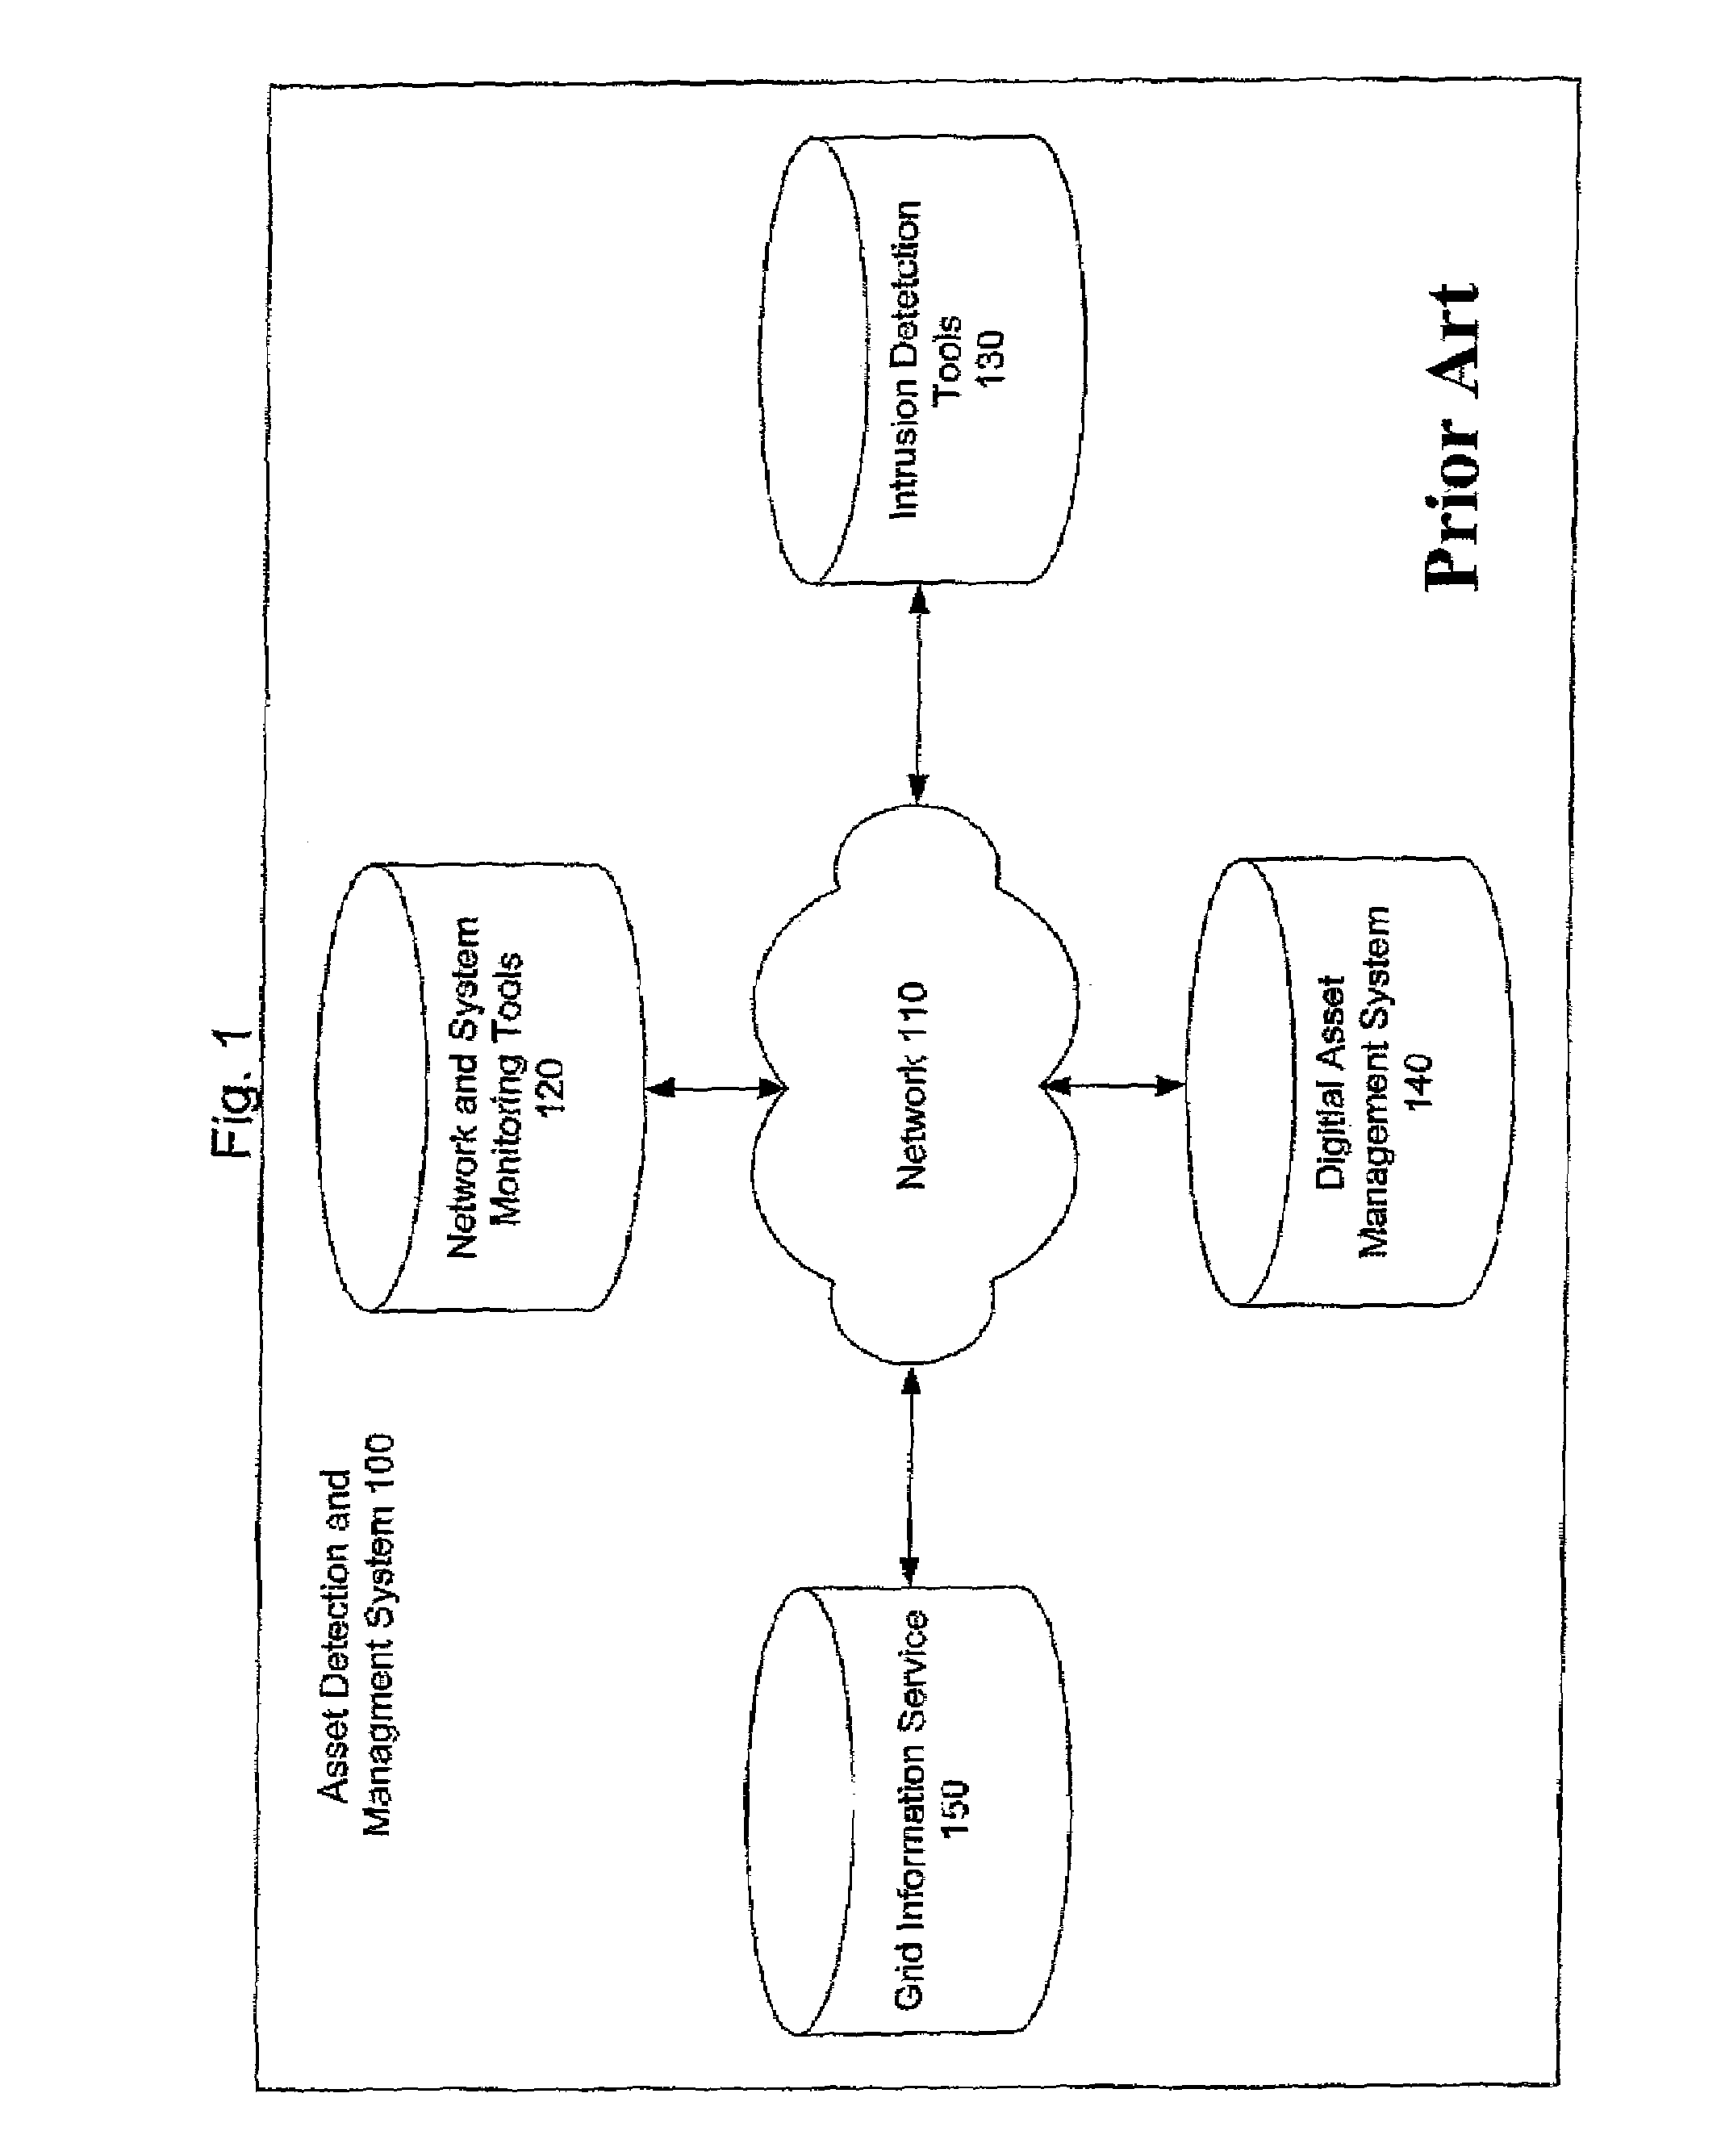 Systems and methods for the detection and management of network assets